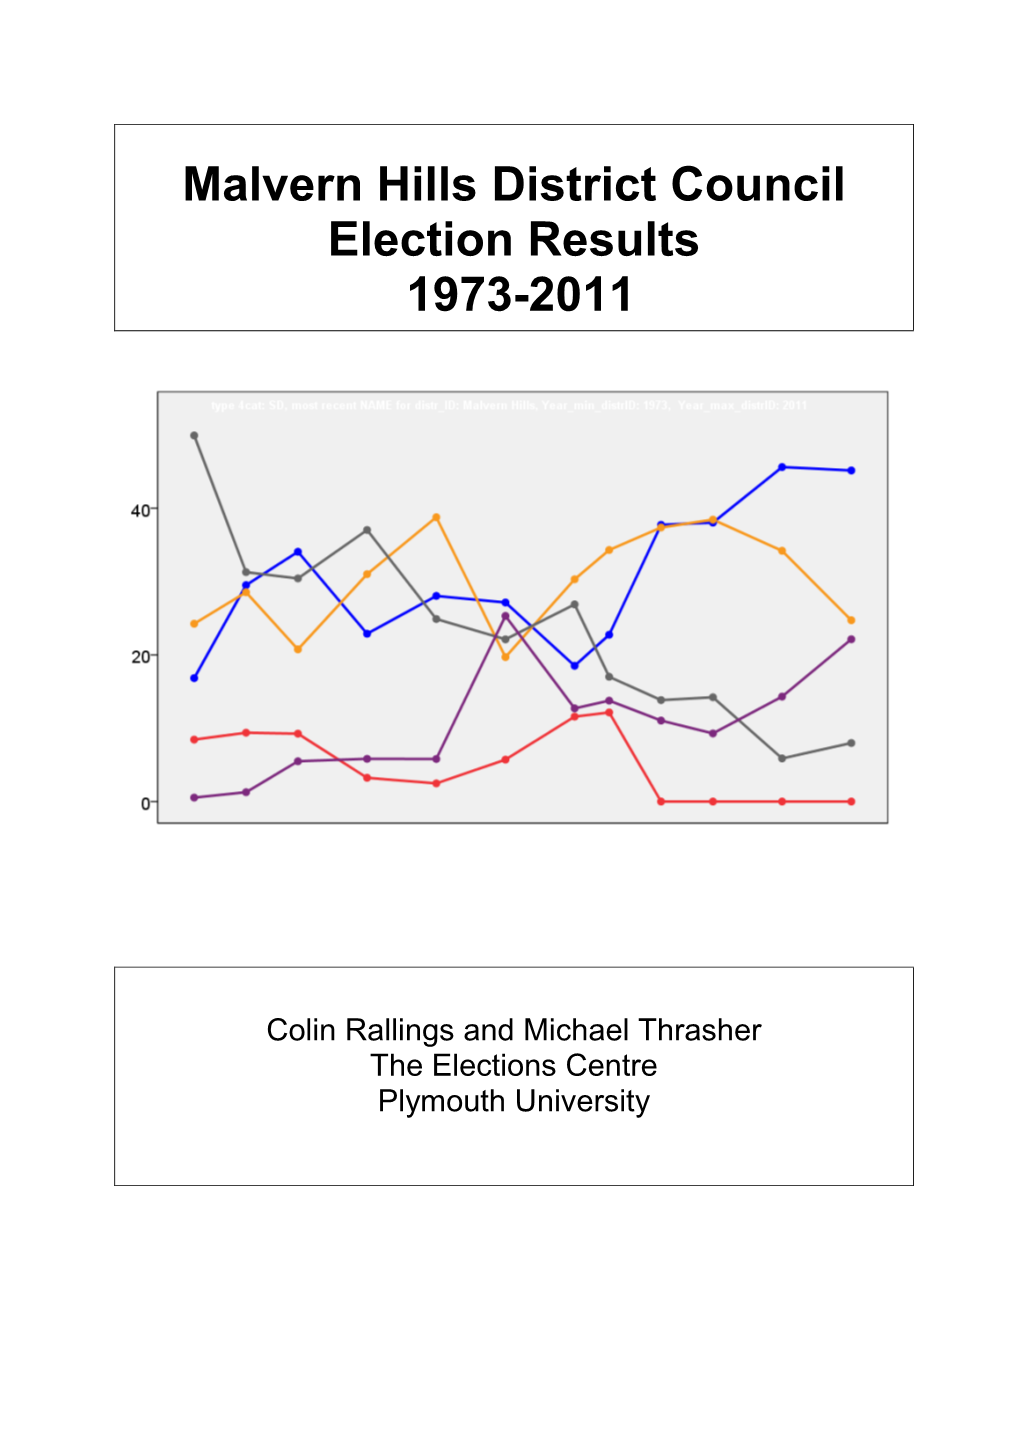 Malvern Hills District Council Election Results 1973-2011